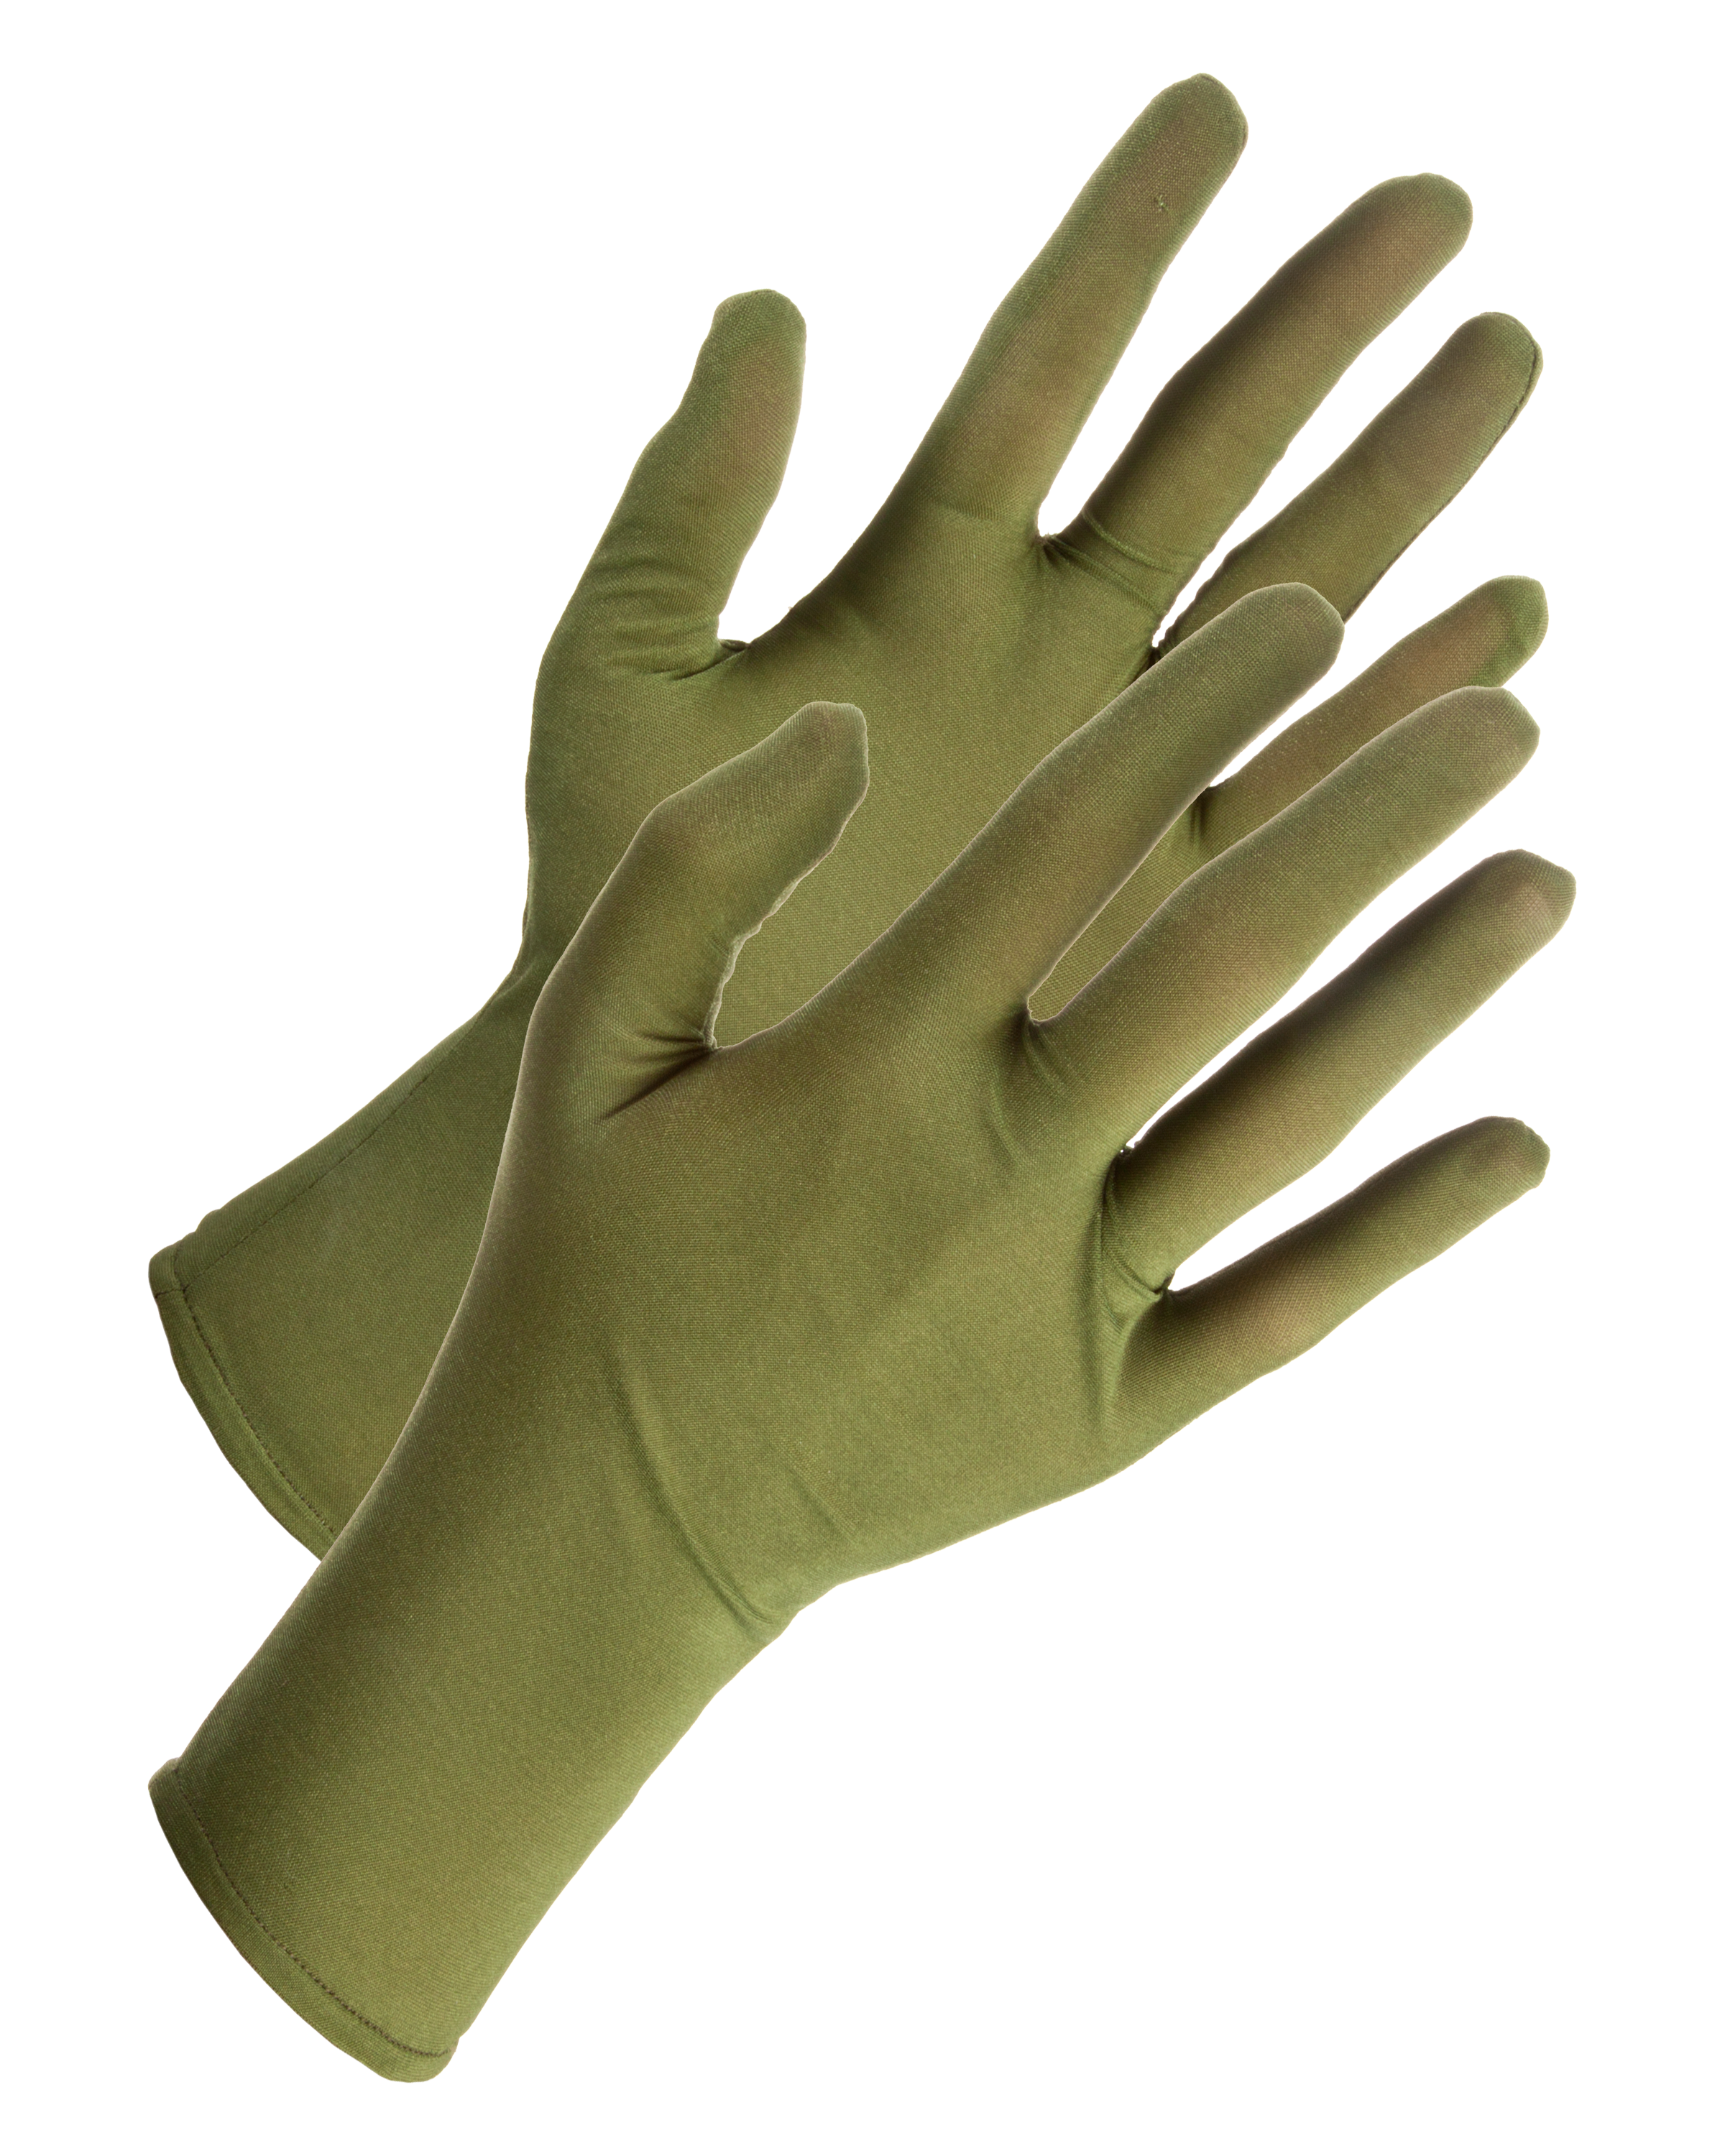 Rynoskin Insect Protection Gloves